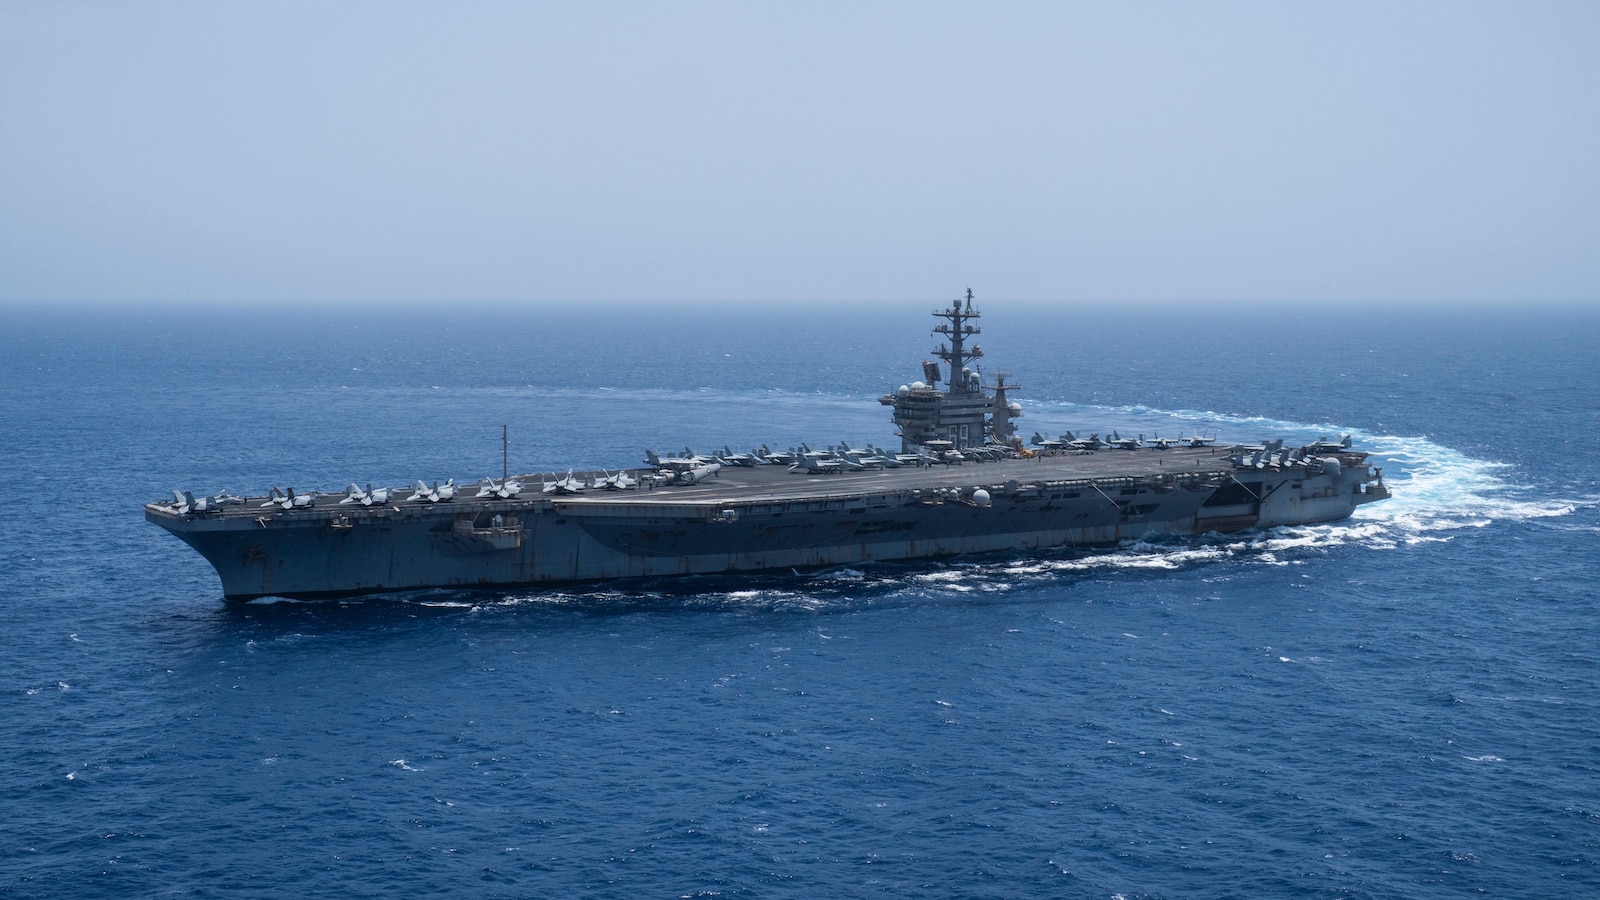 Yemen Houthi rebels launch attack on ship in Gulf of Aden as USS Eisenhower prepares to depart